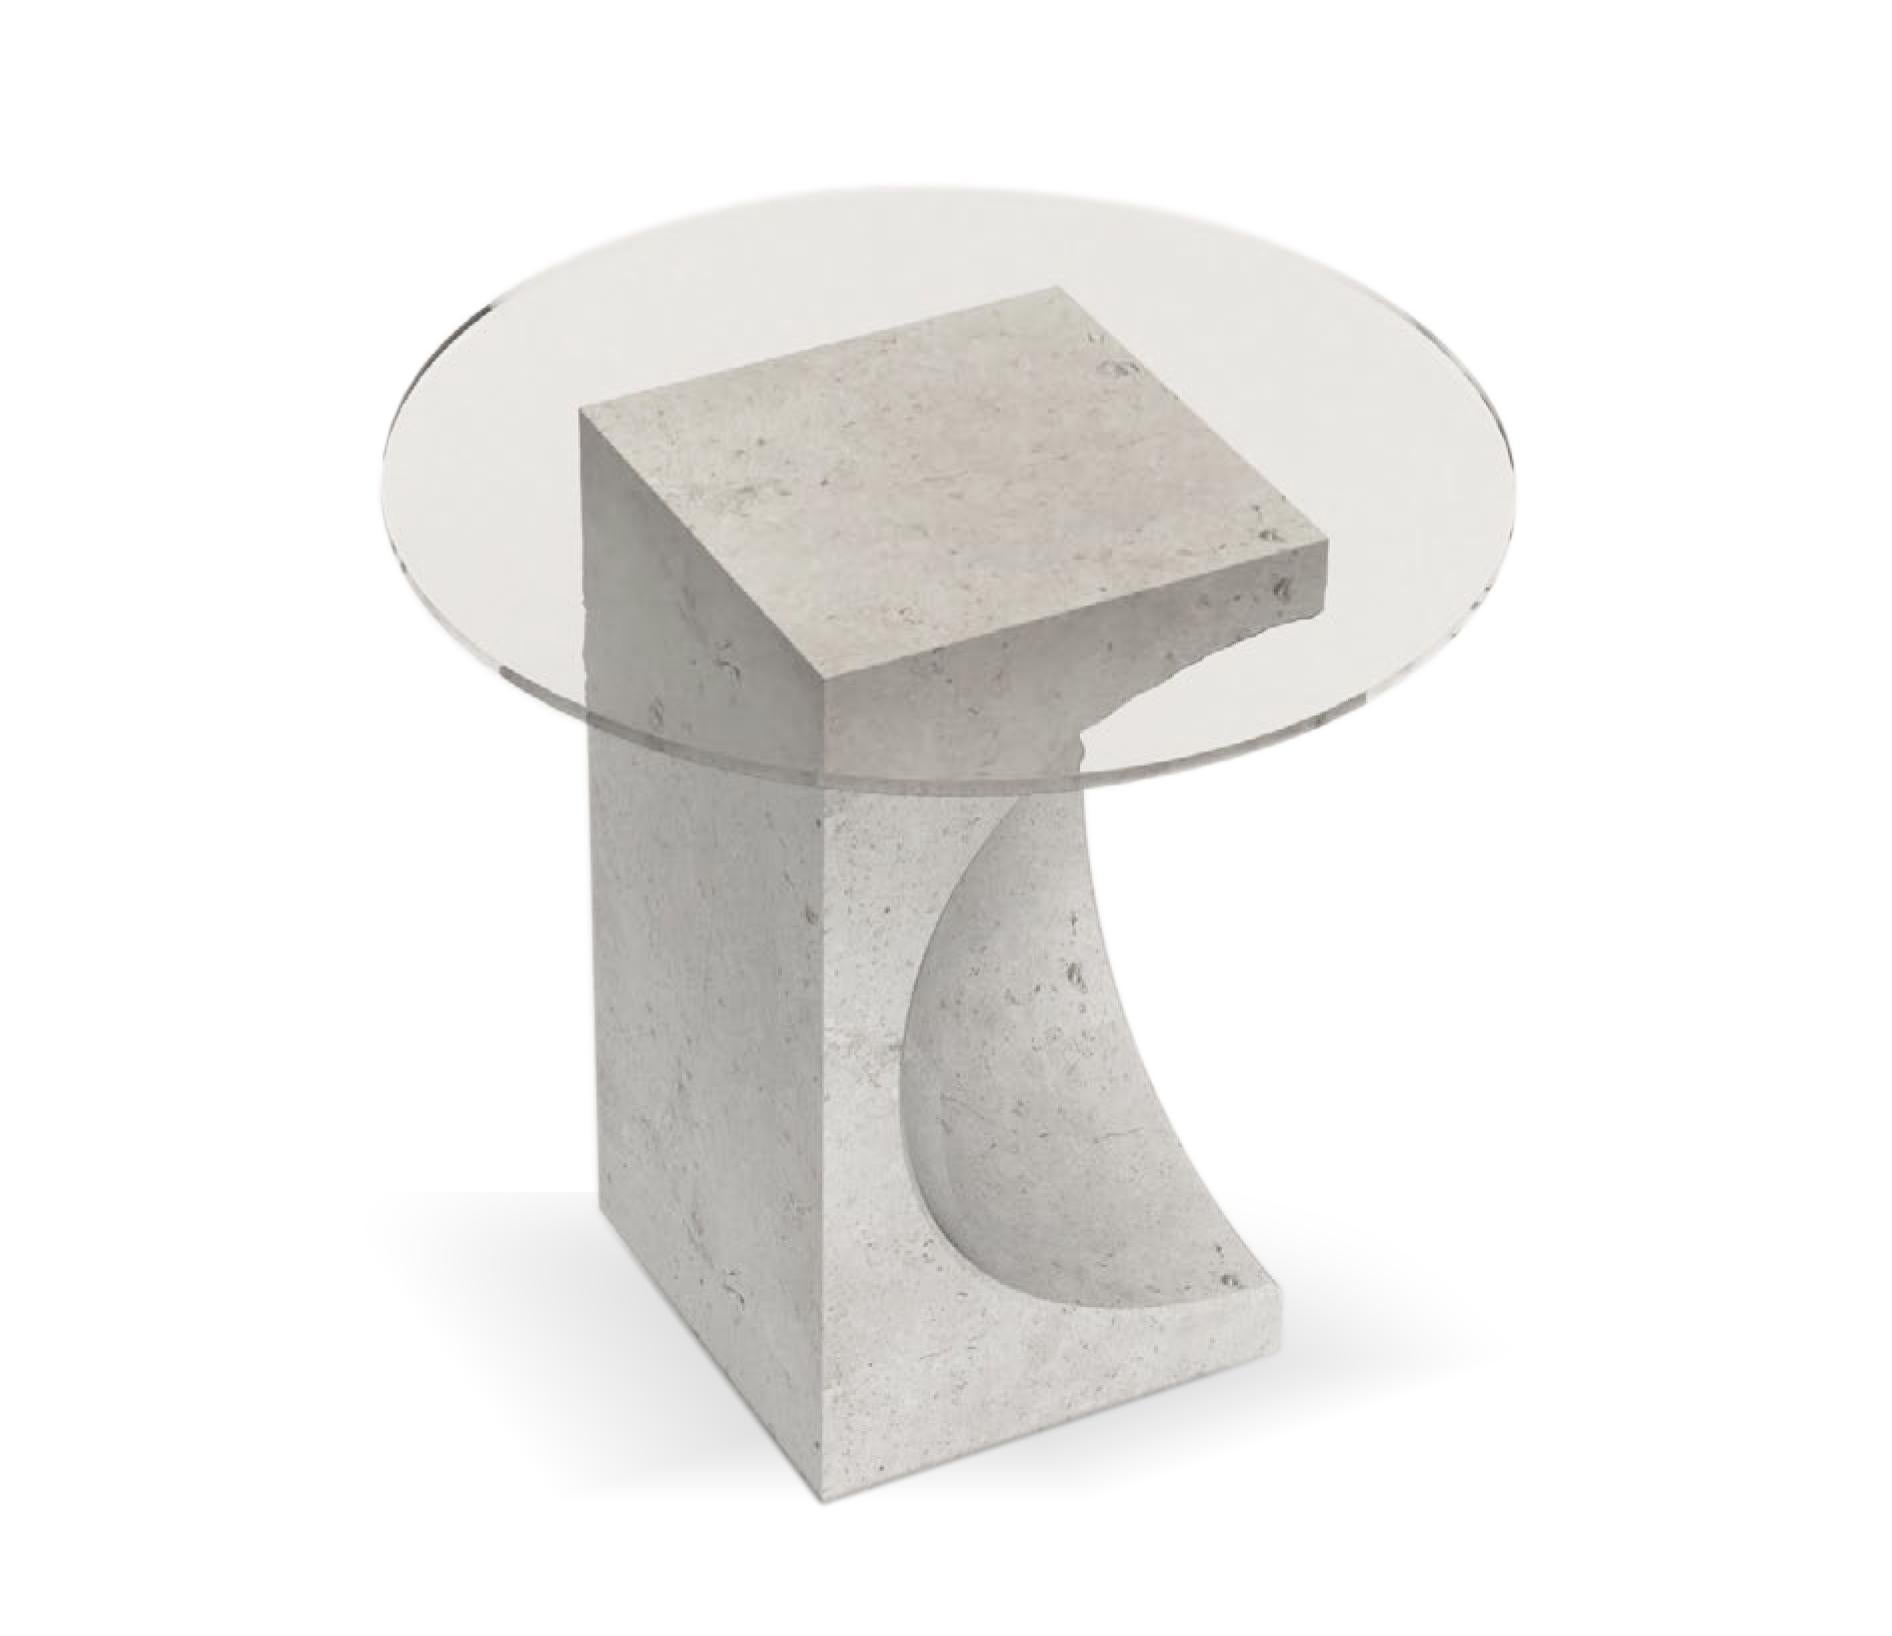 Unique edge side table by Collector
Dimensions: D 50 x H 50 cm
Materials: glass, travertino
Other materials available. 

The Collector brand aims to be part of the daily life by fusing furniture to our home routine and lifestyle, that’s why